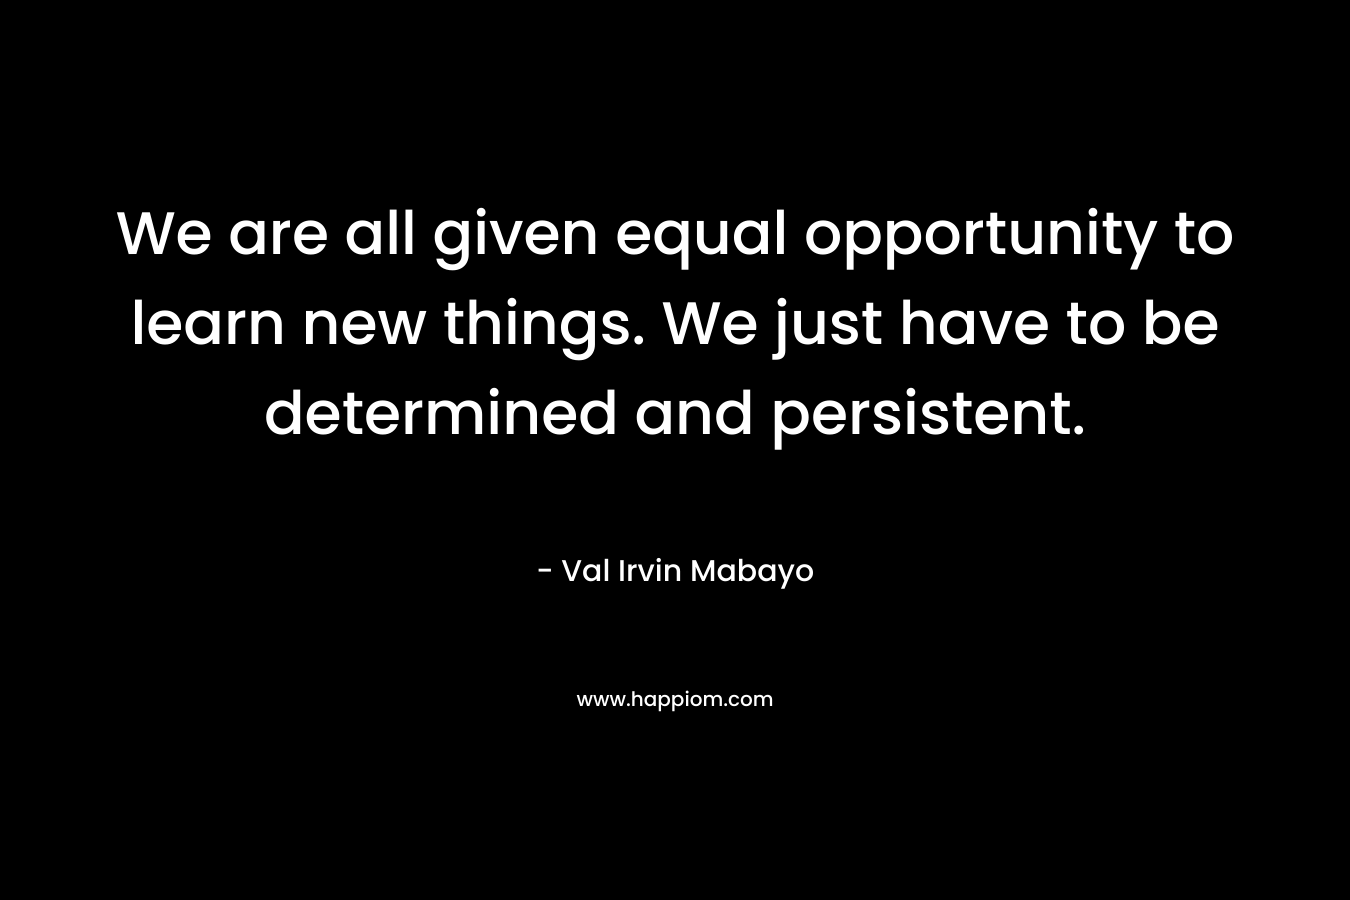 We are all given equal opportunity to learn new things. We just have to be determined and persistent.